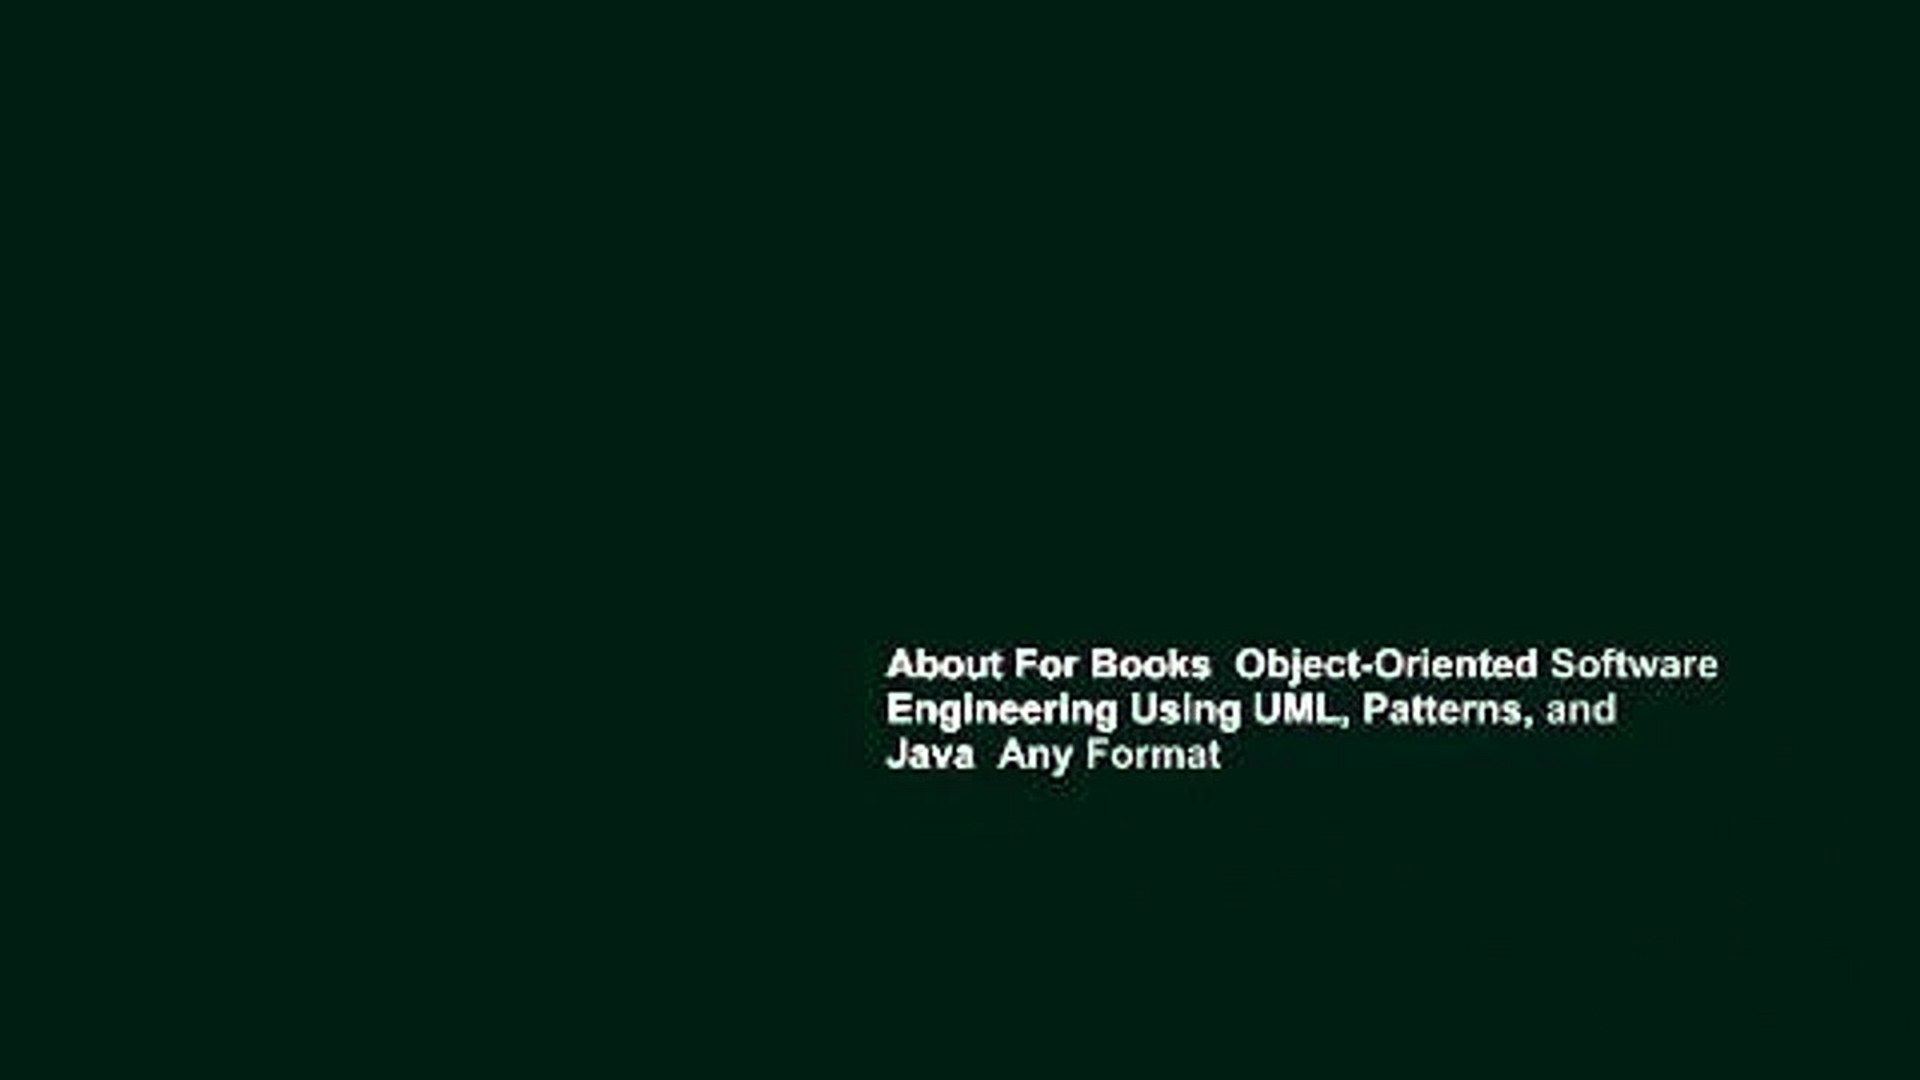 About For Books  Object-Oriented Software Engineering Using UML, Patterns, and Java  Any Format